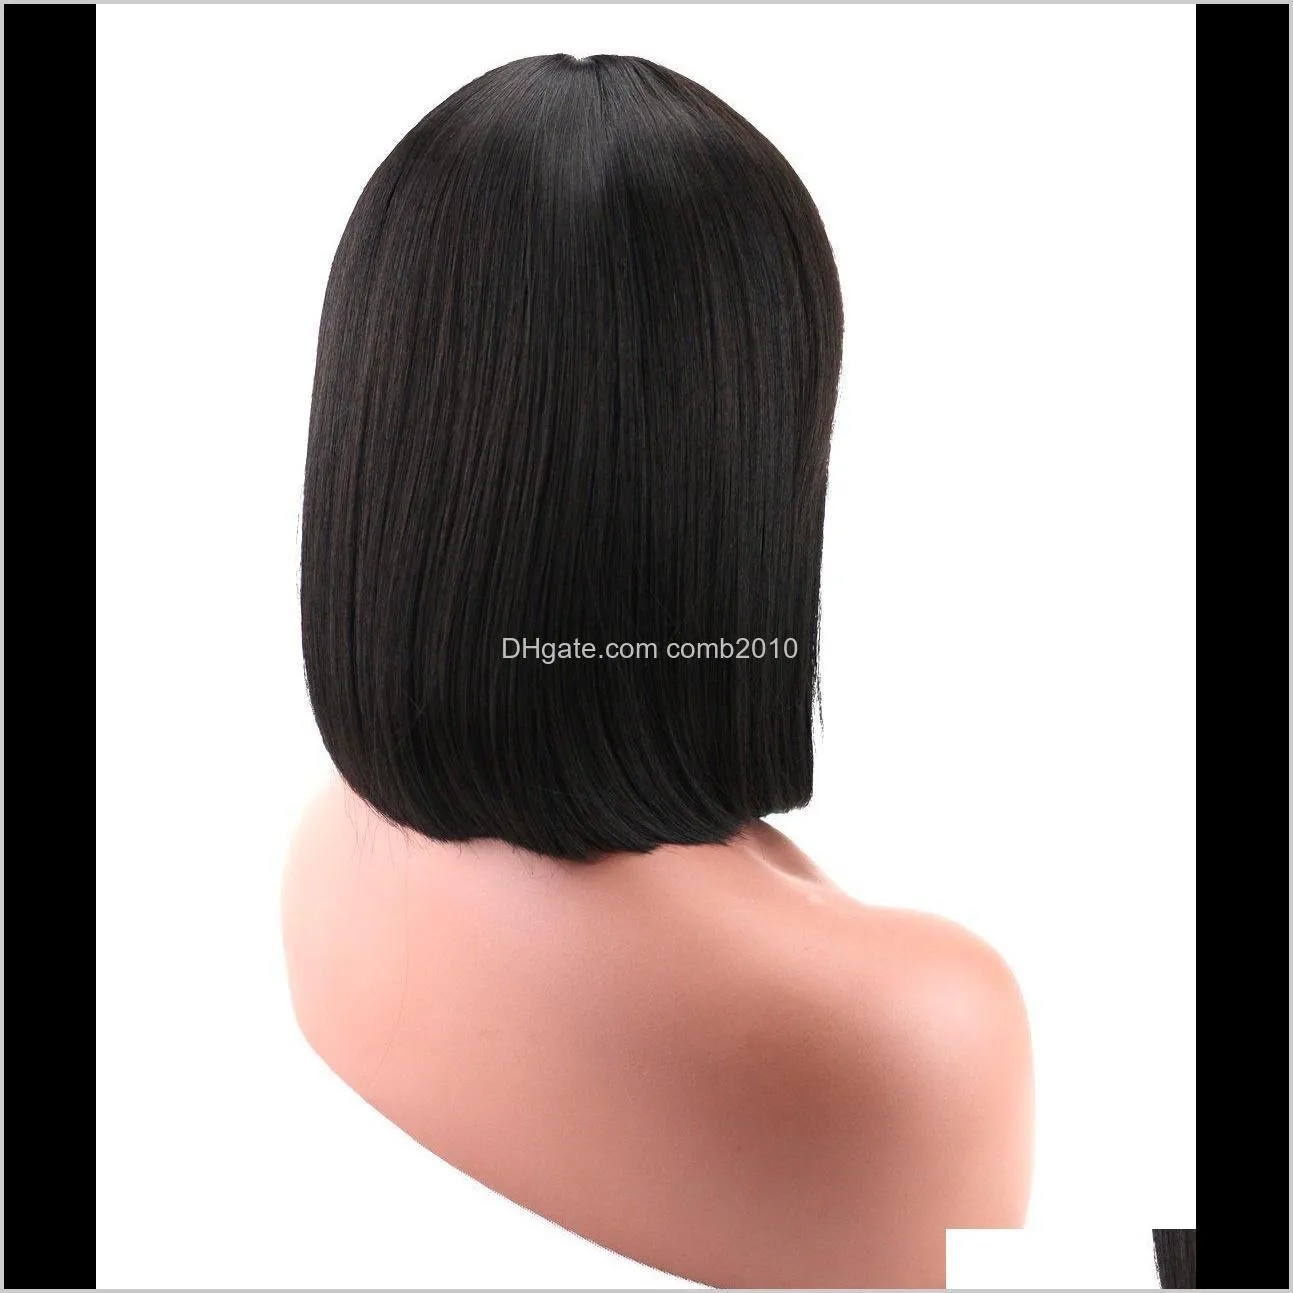 short bob lace wigs with bangs brazilian virgin hair straight lace front human hair wigs for black women swiss lace frontal wigs 